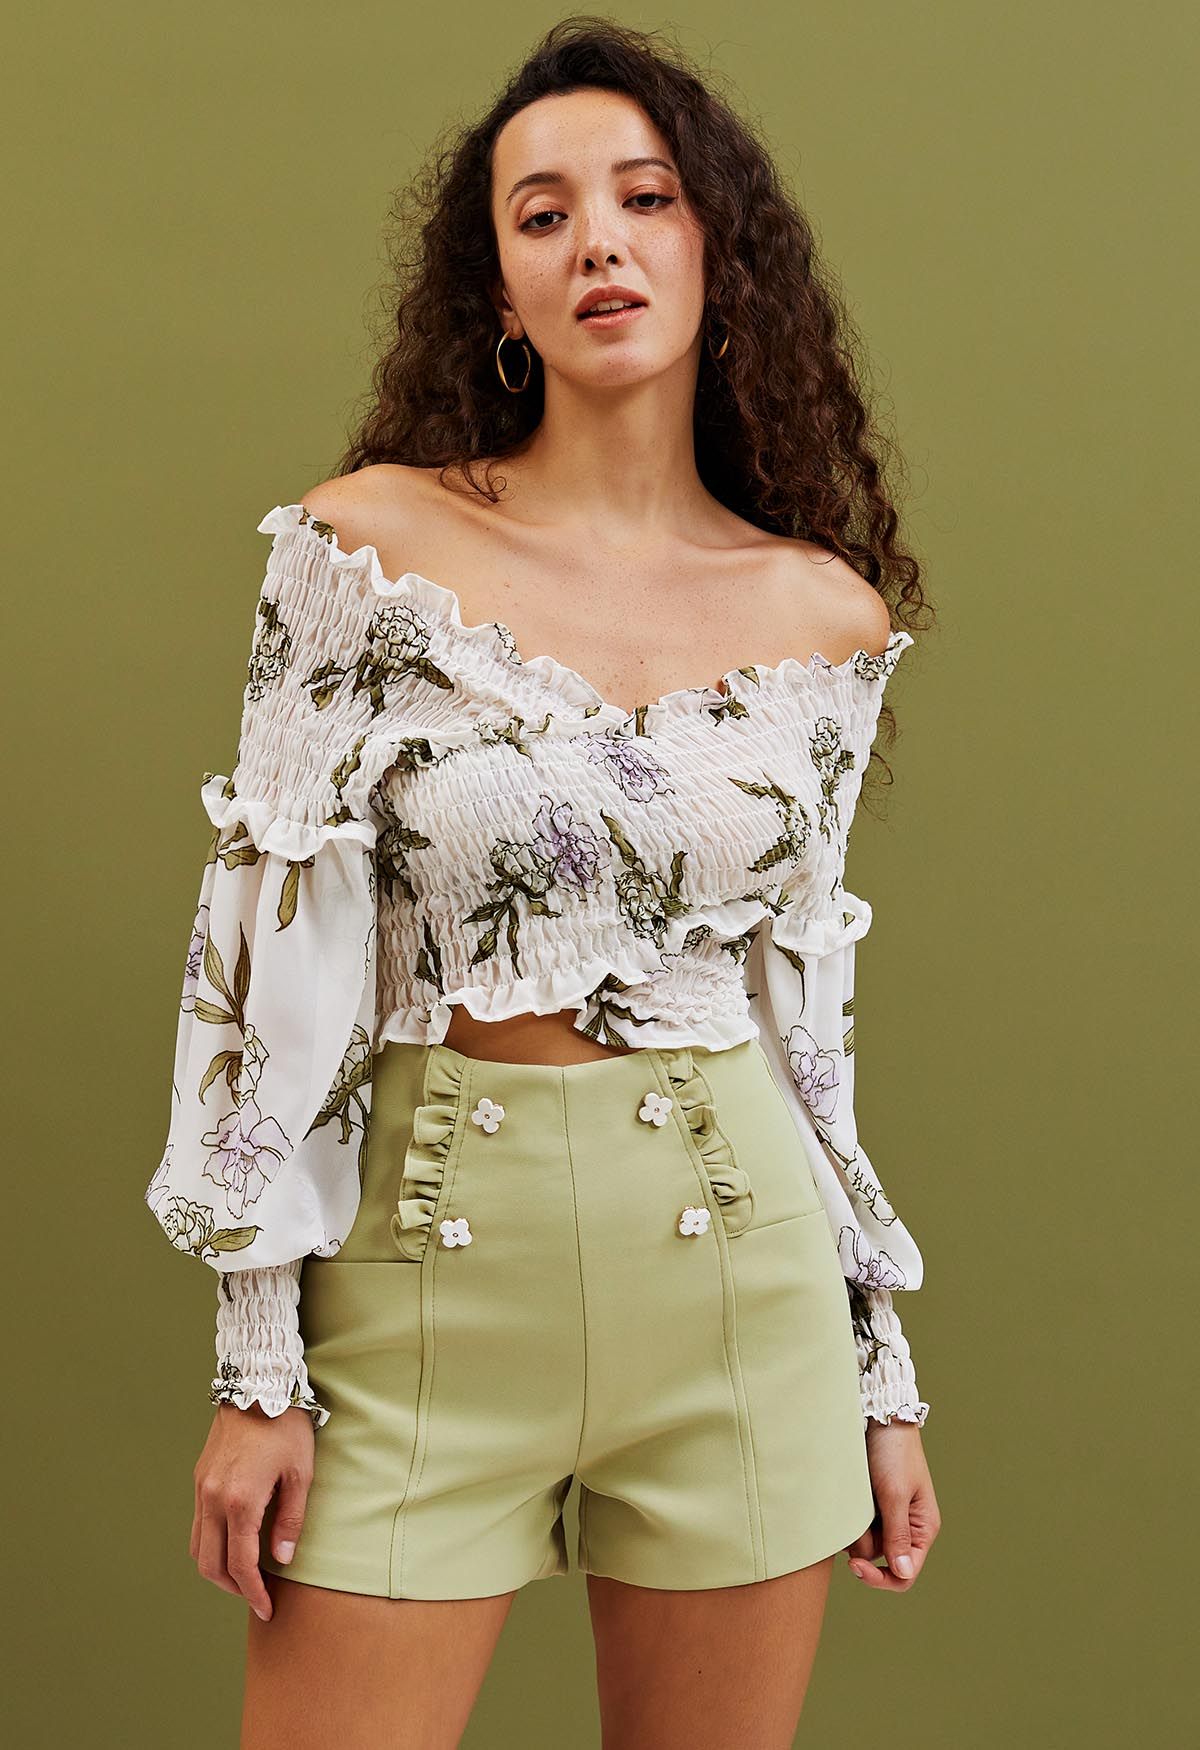 Ruffle Cross Off-Shoulder Floral Crop Top in White